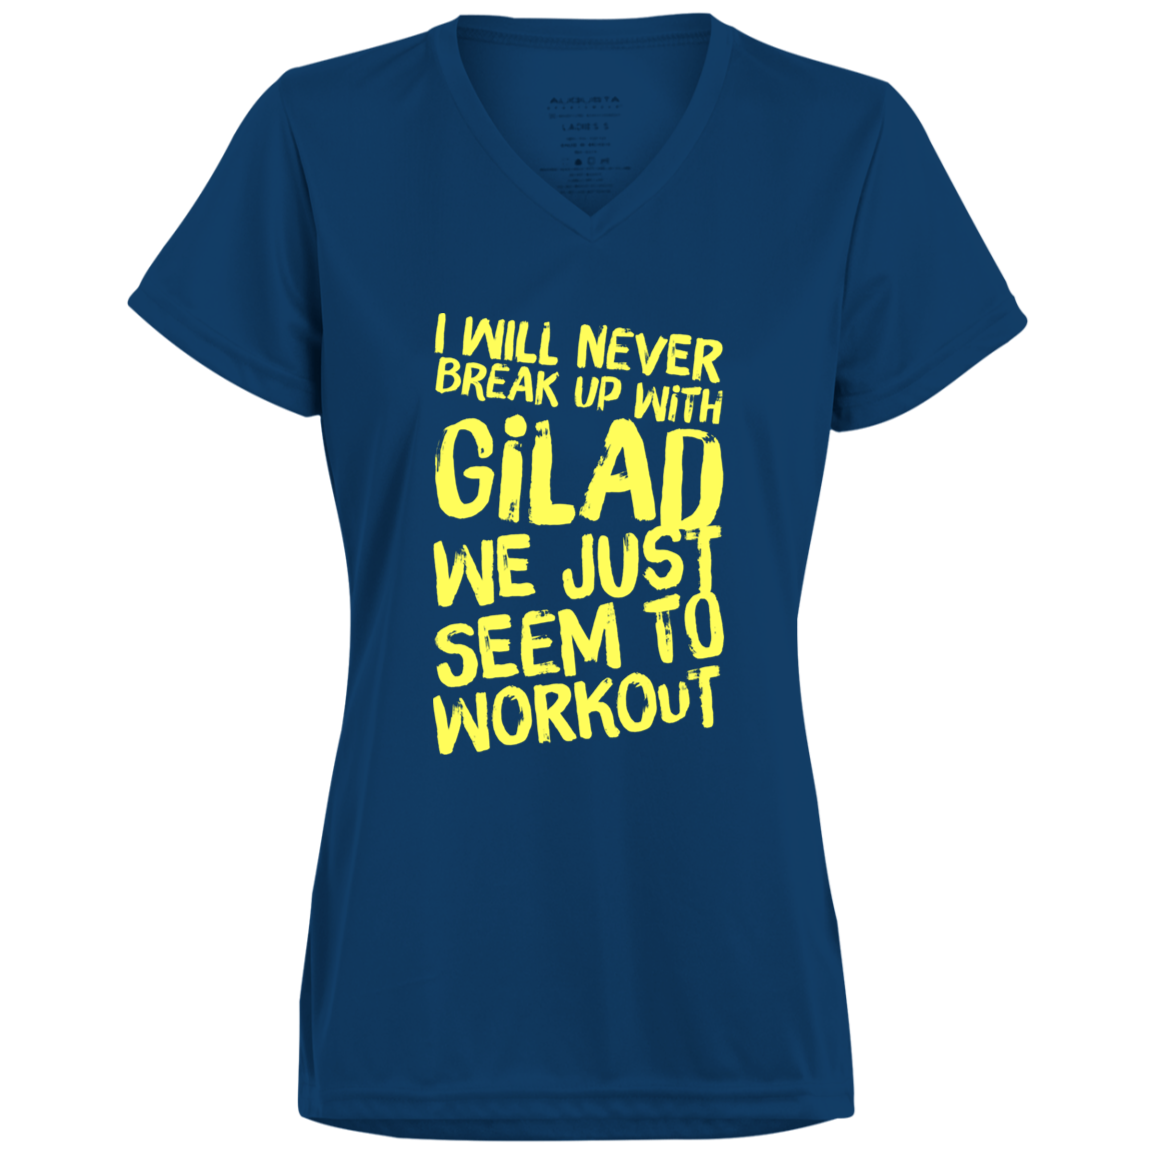 I will Never Break Up With Gilad Ladies’ Moisture-Wicking V-Neck Tee